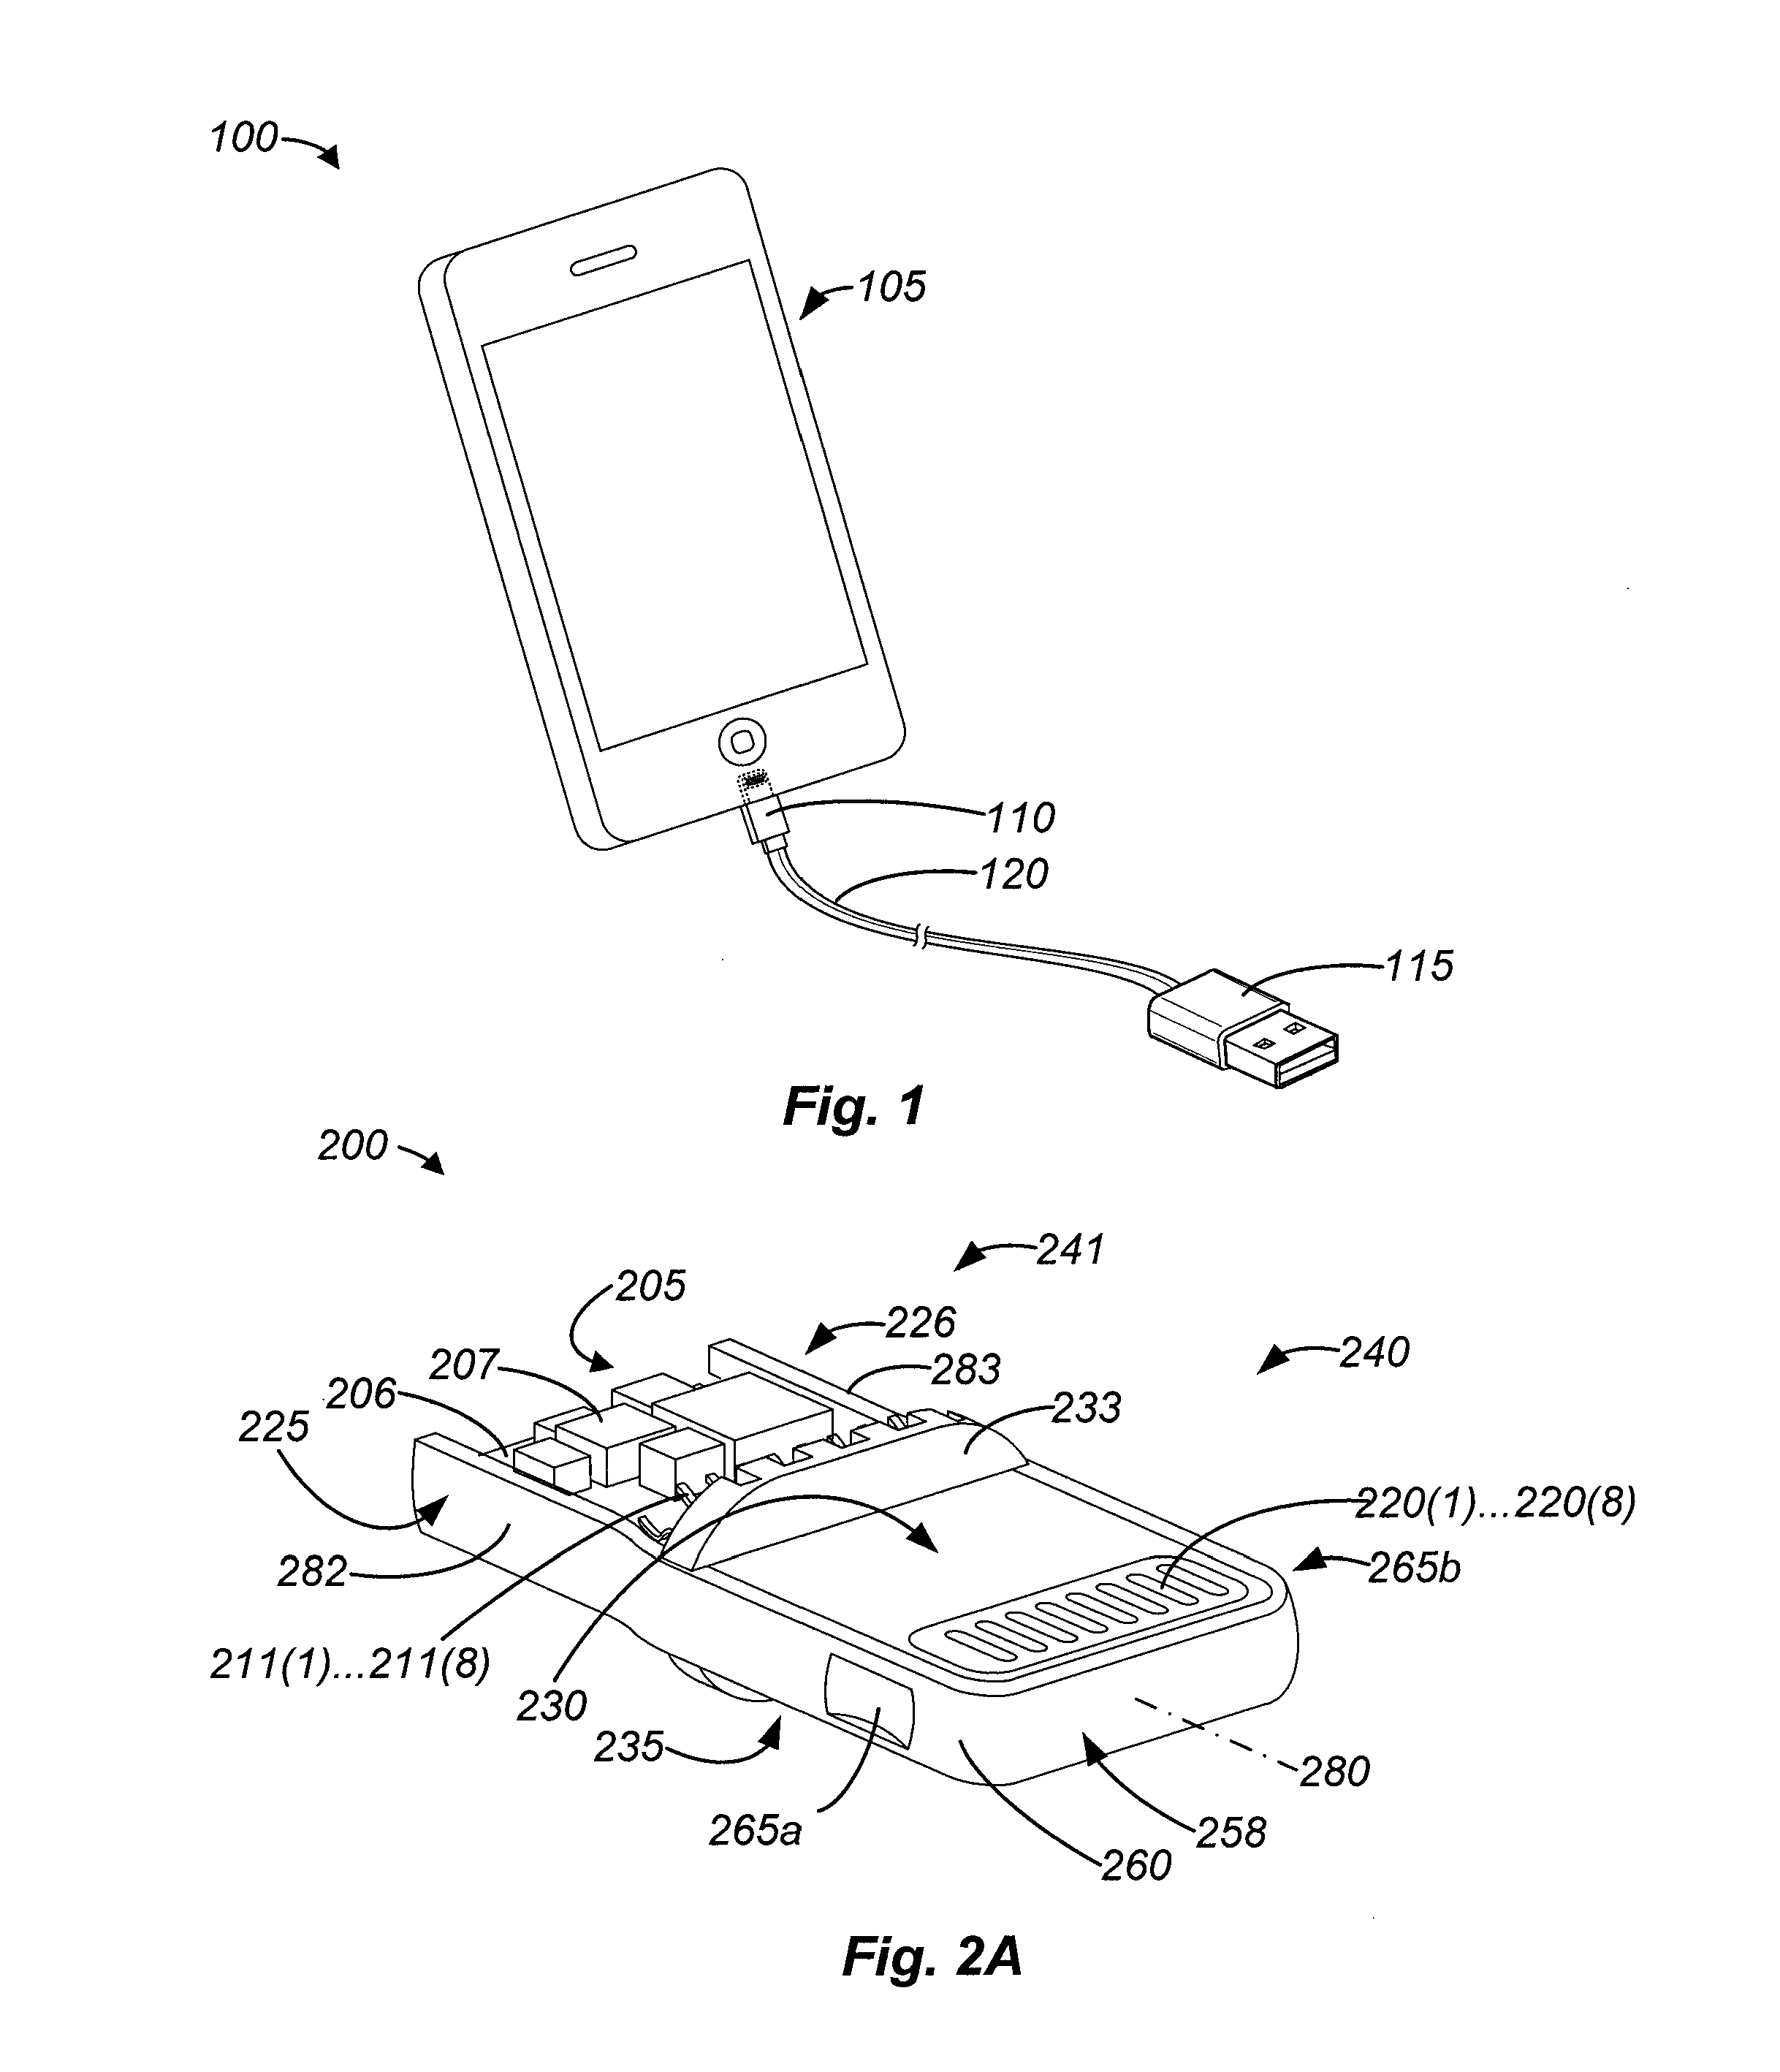 Plug connector having a ground band and an insert molded contact assembly